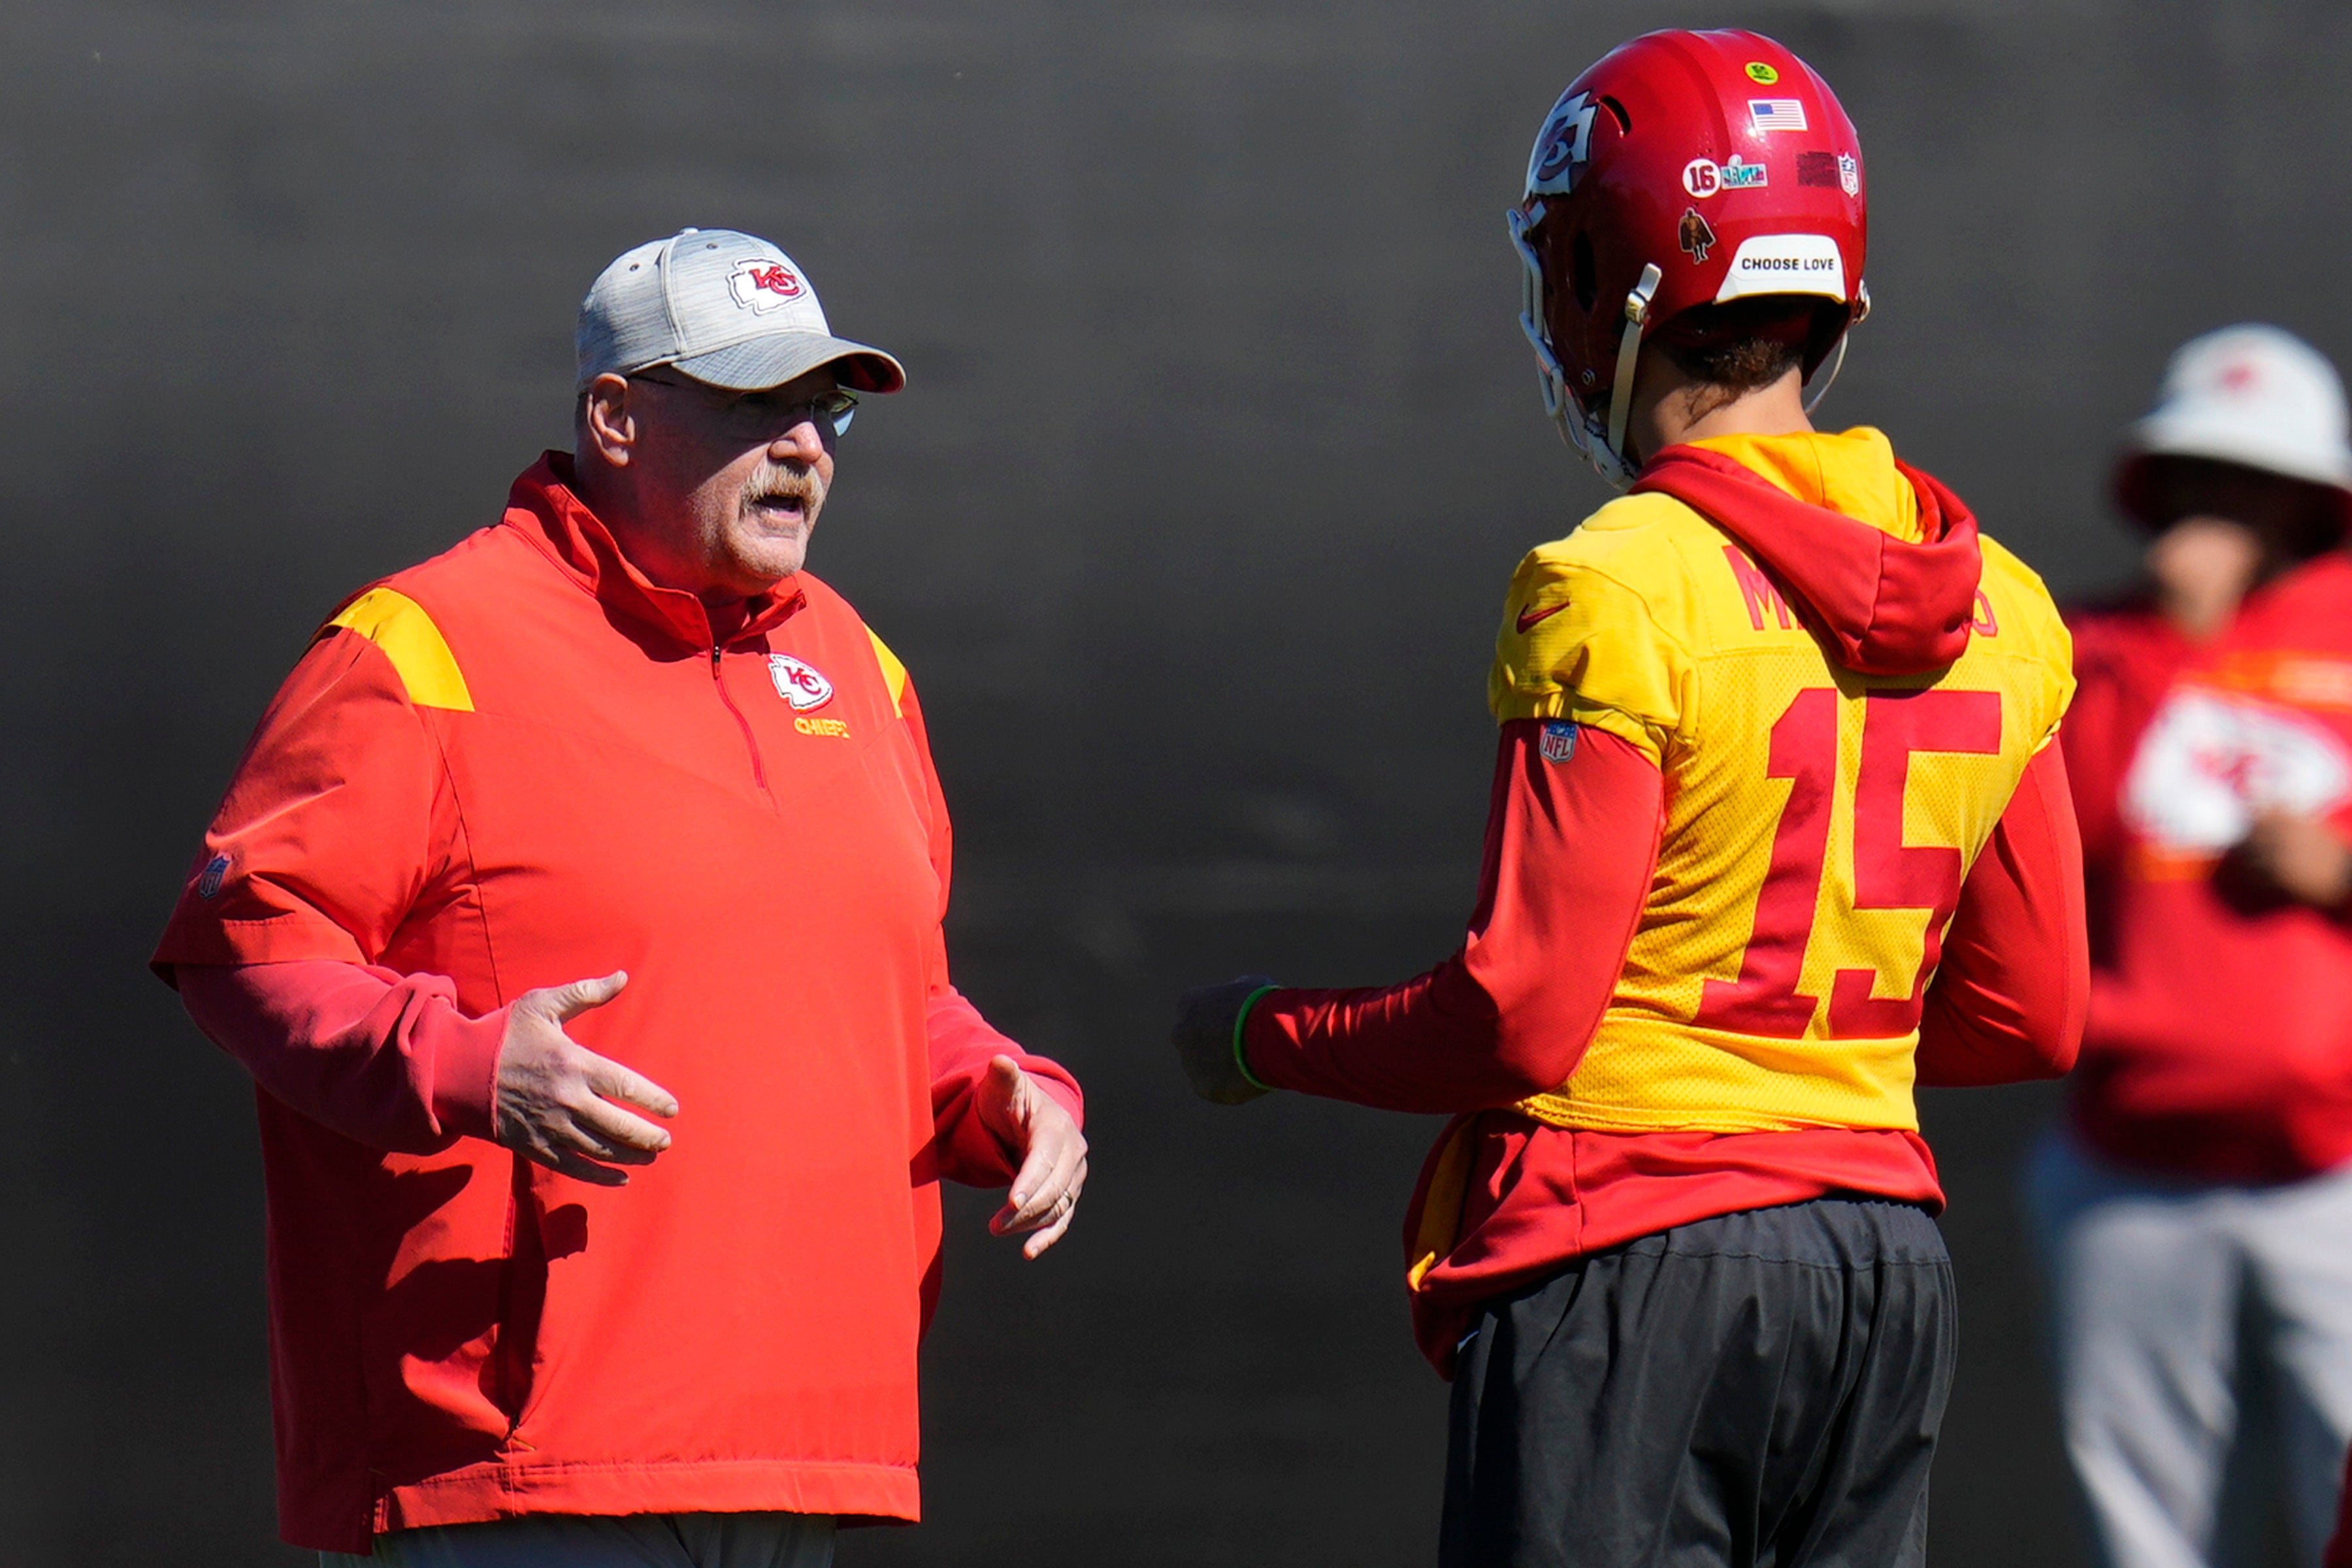 Andy Reid aims to lead Chiefs past former team in Super Bowl - American  Press | American Press